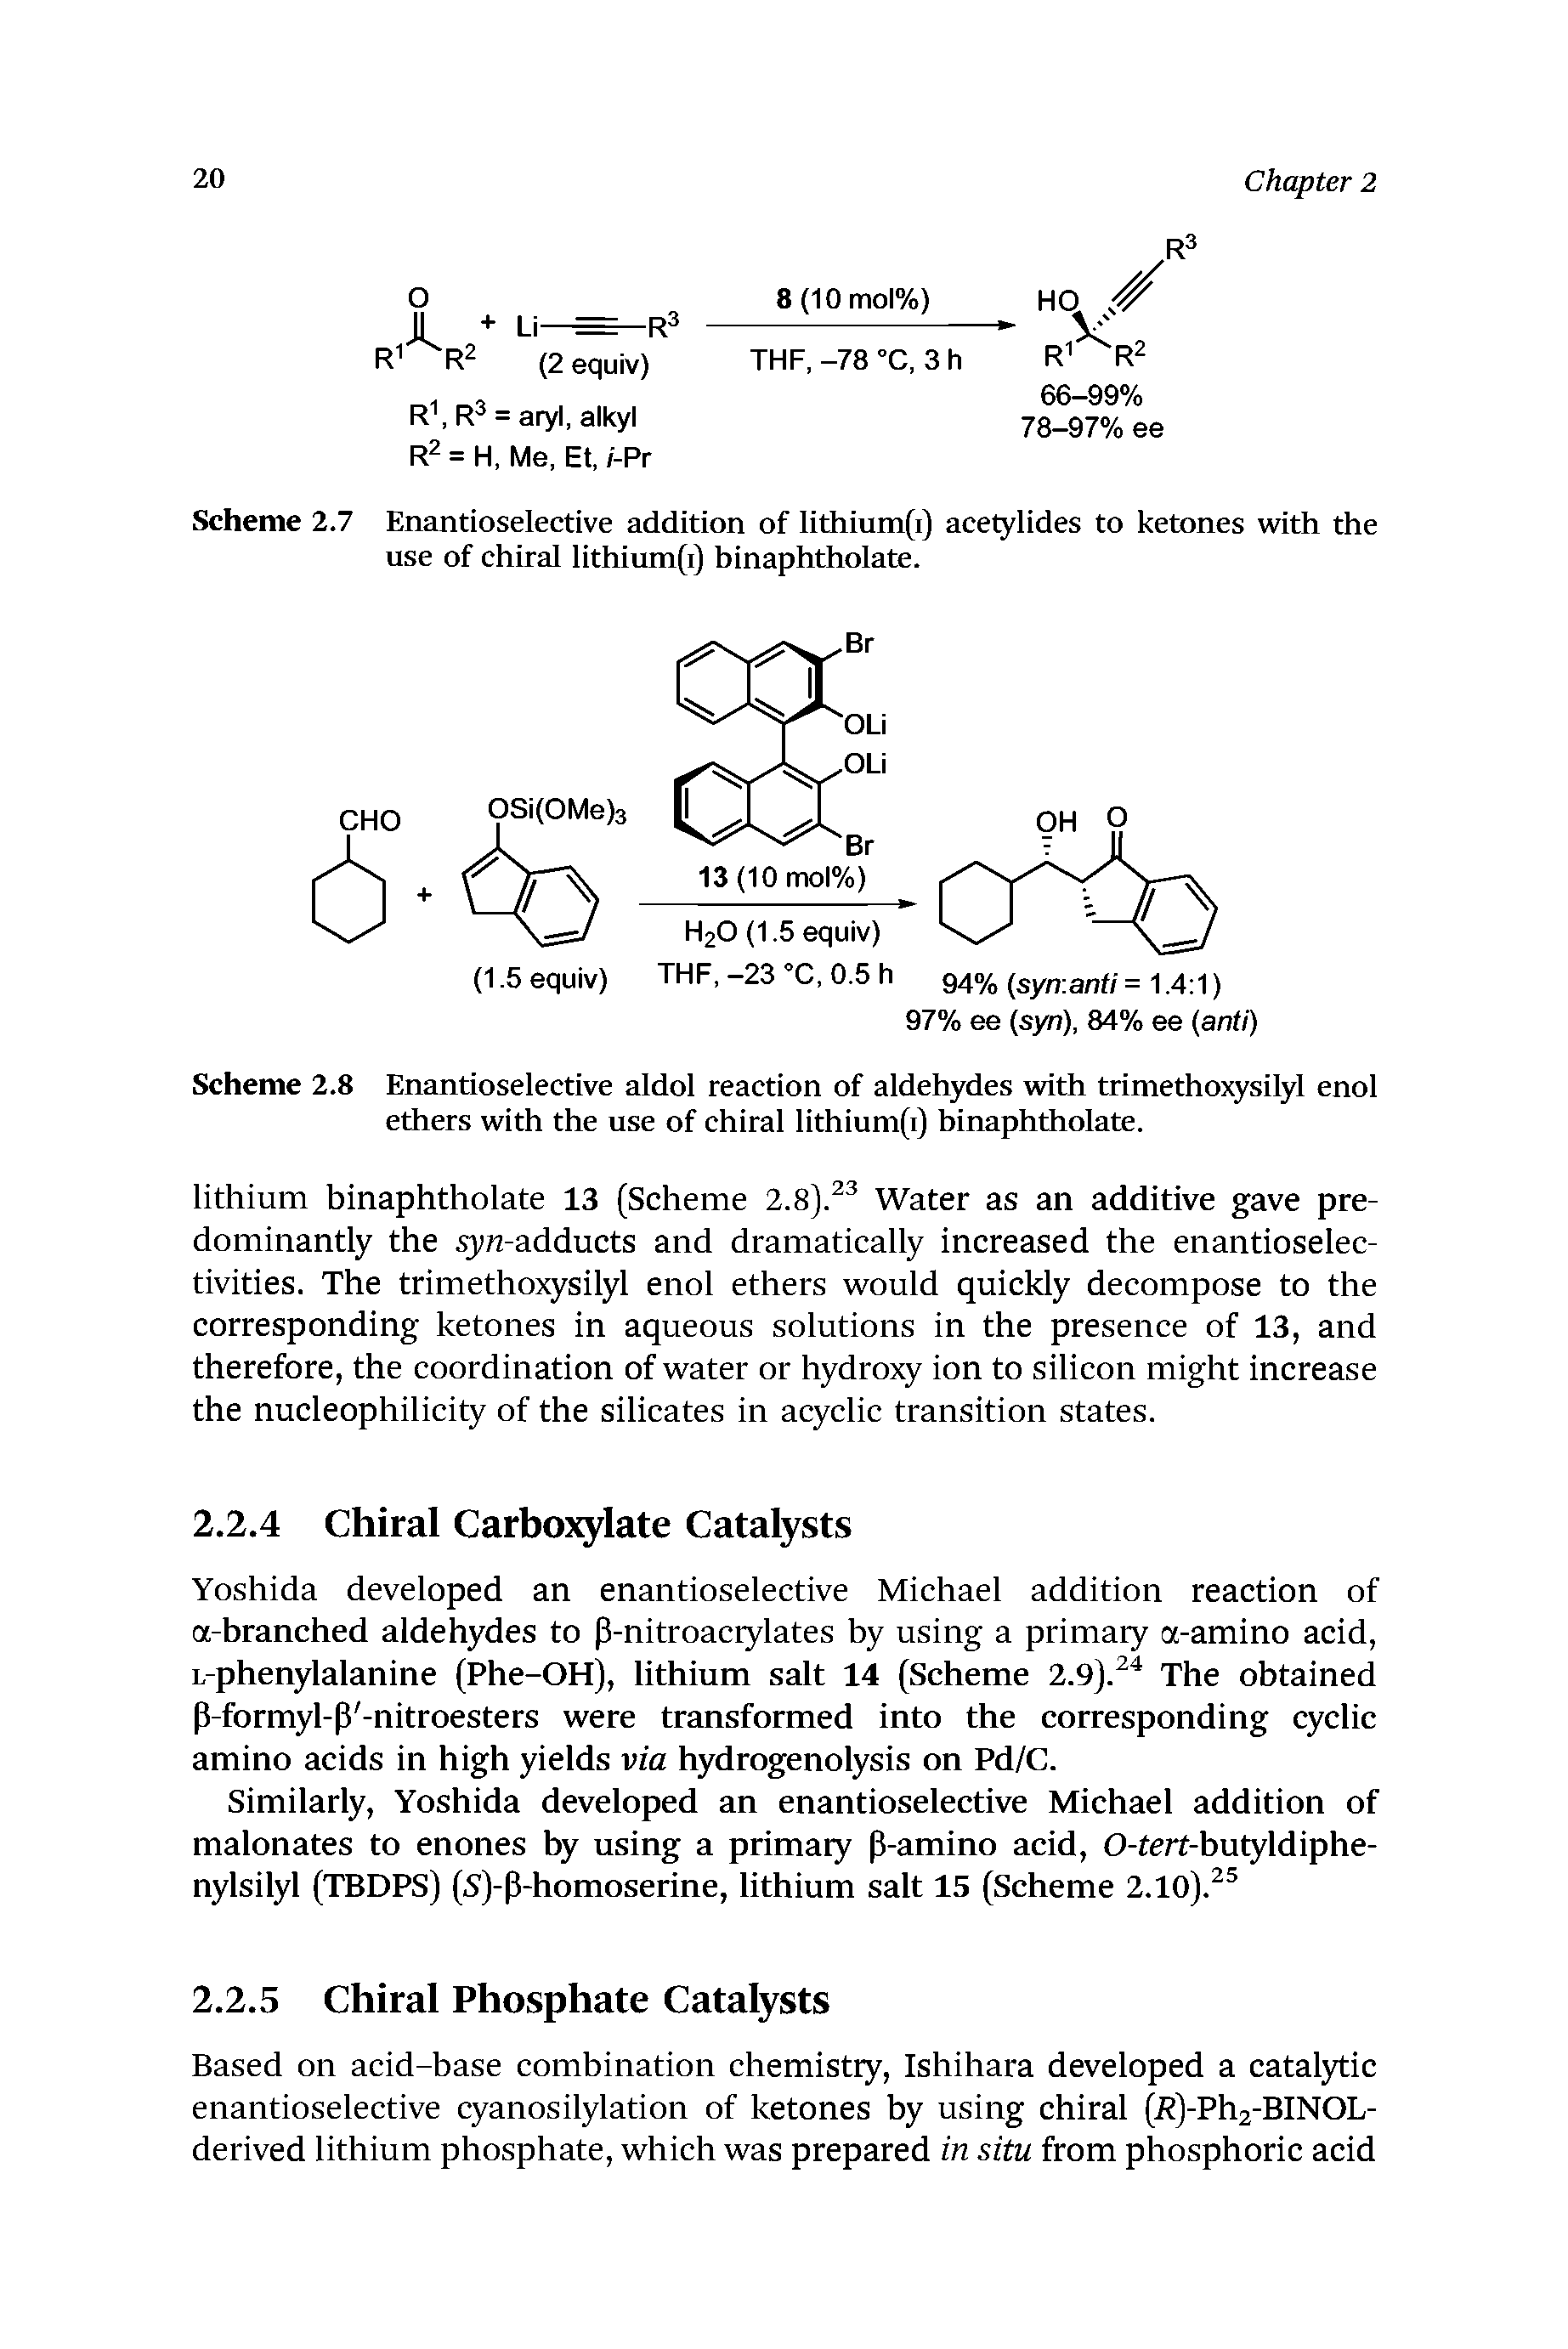 Scheme 2.7 Enantioselective addition of lithium(i) acetylides to ketones with the use of chiral lithium(i) binaphtholate.